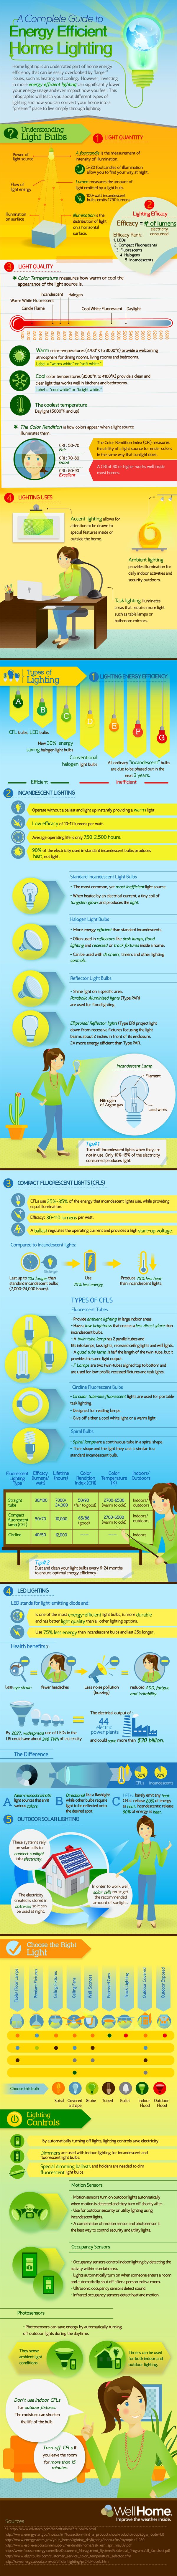 A Complete Guide to Energy Efficient Home Lighting